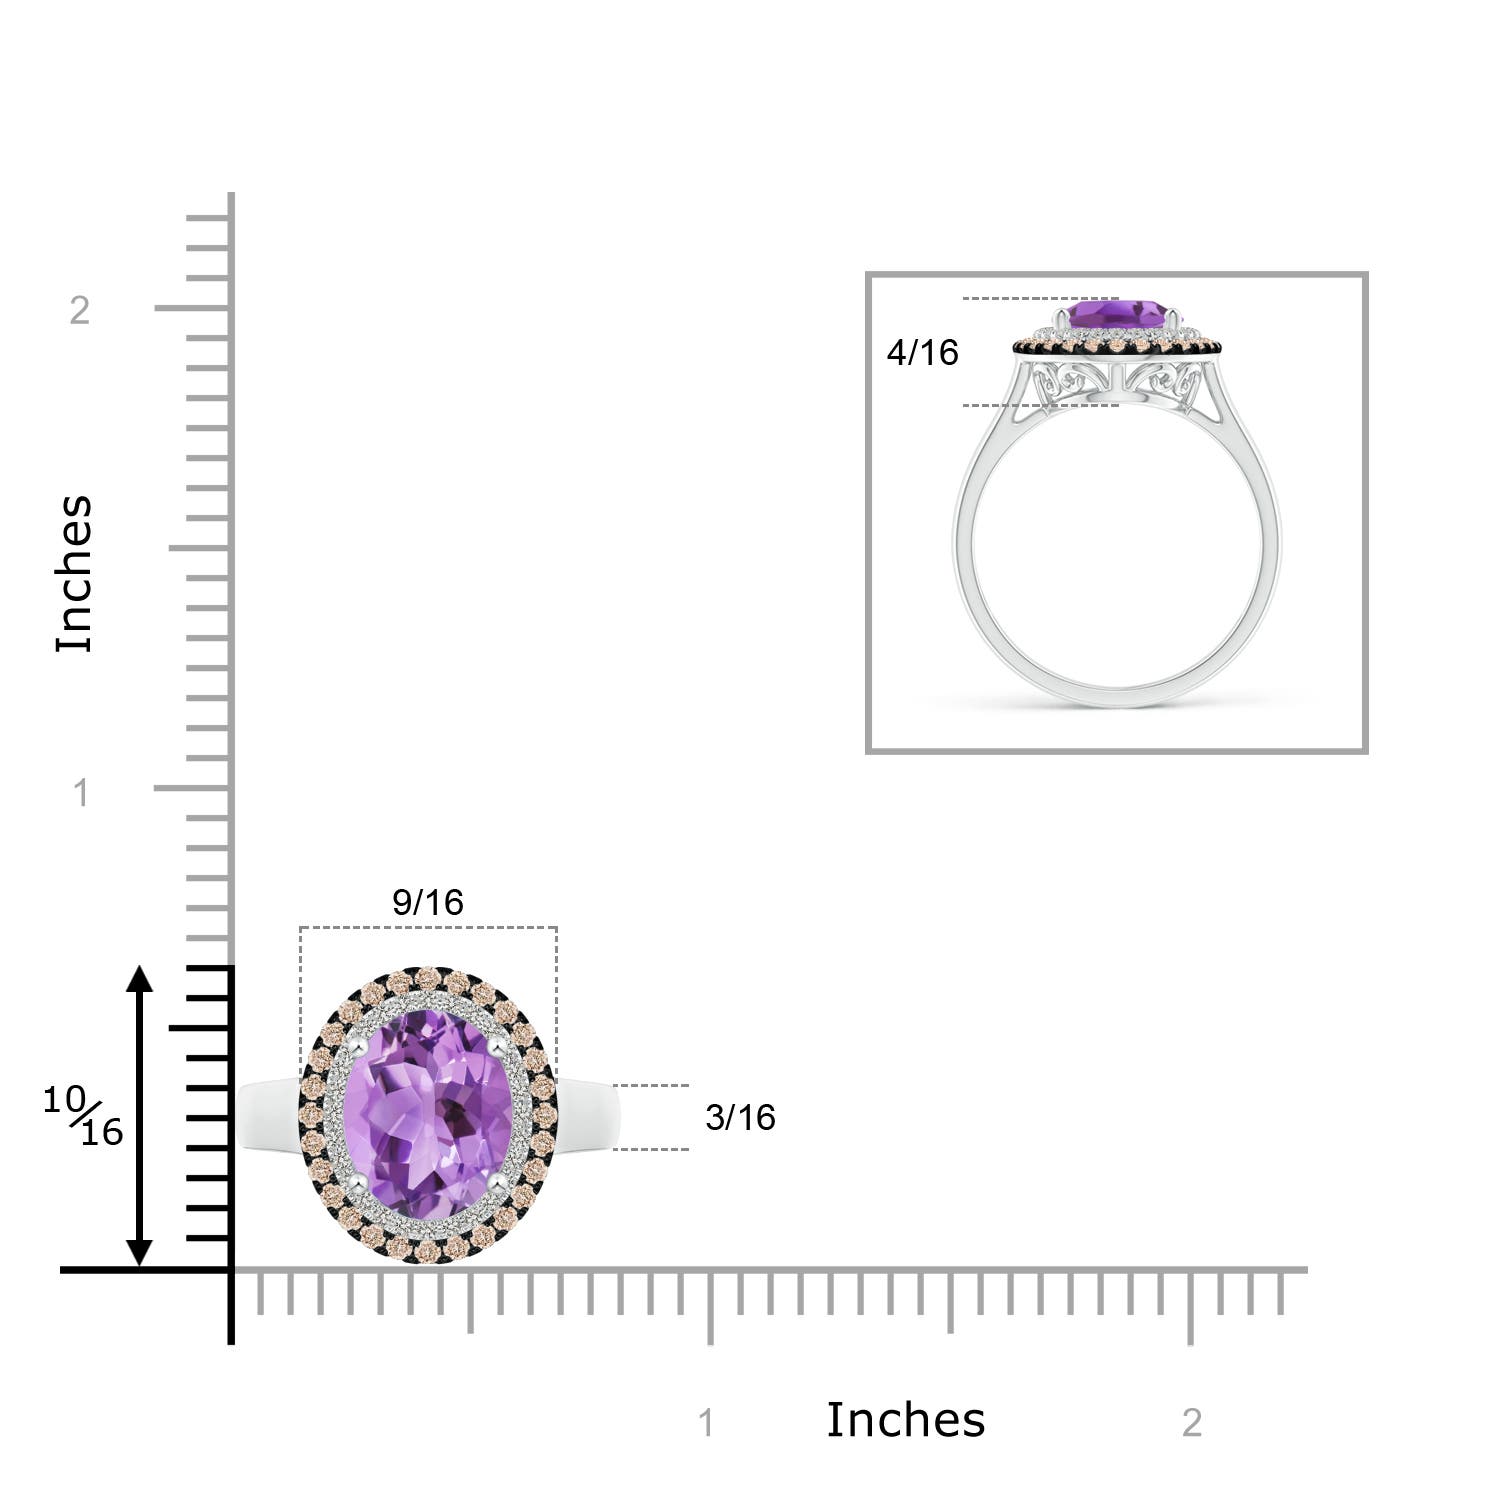 A - Amethyst / 3.71 CT / 14 KT White Gold